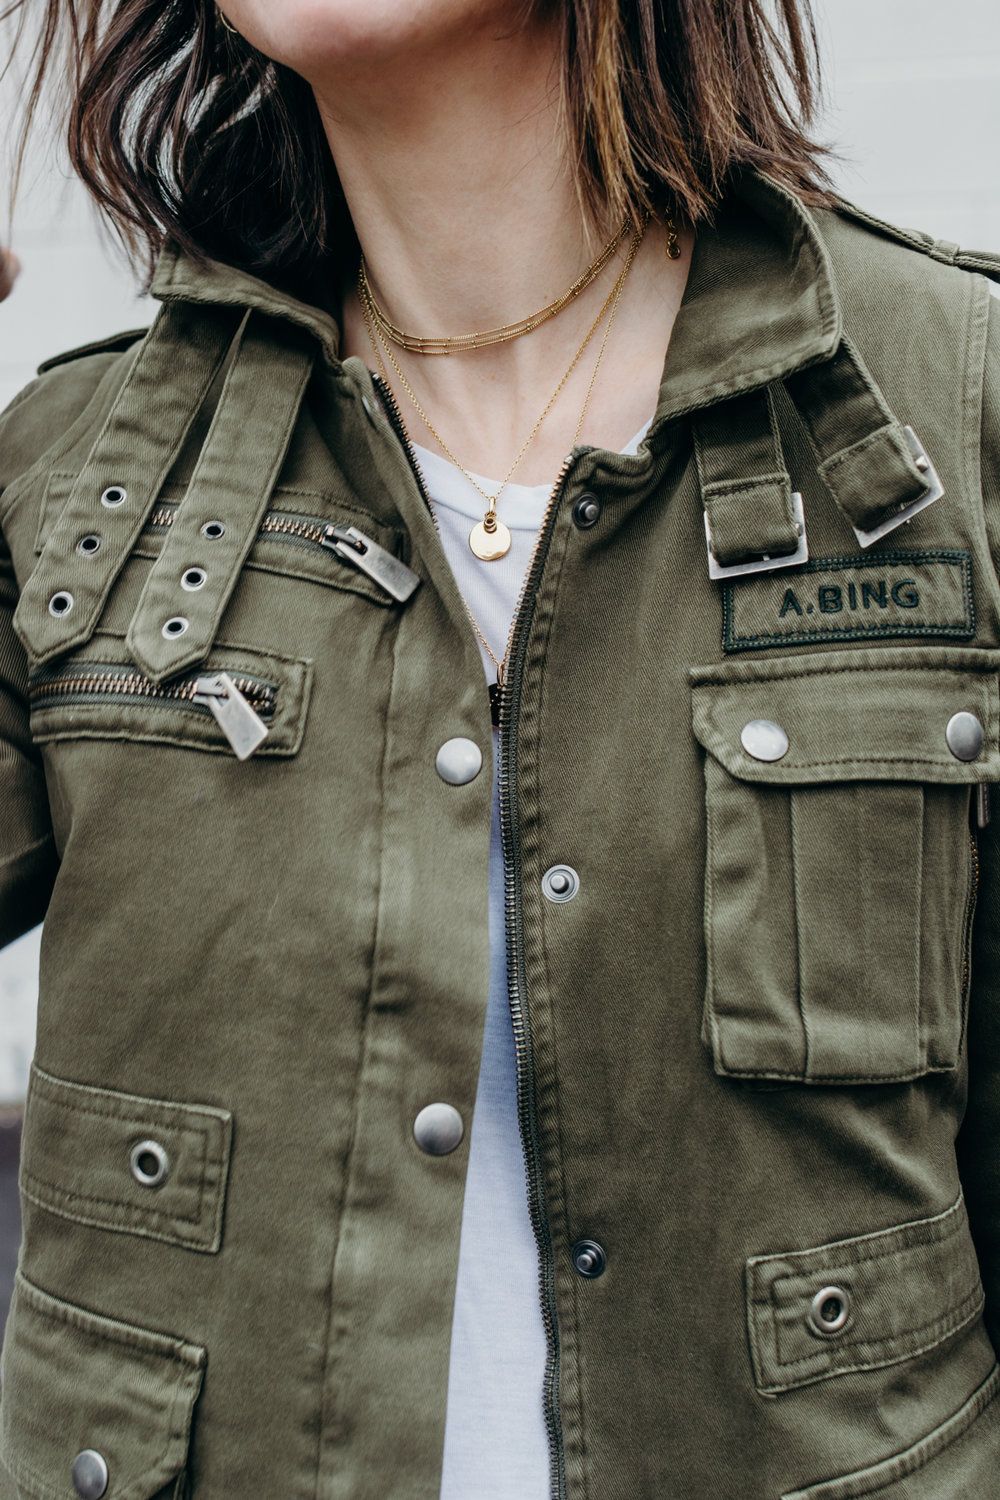 Military style jacket: Defining the style
in a macho way